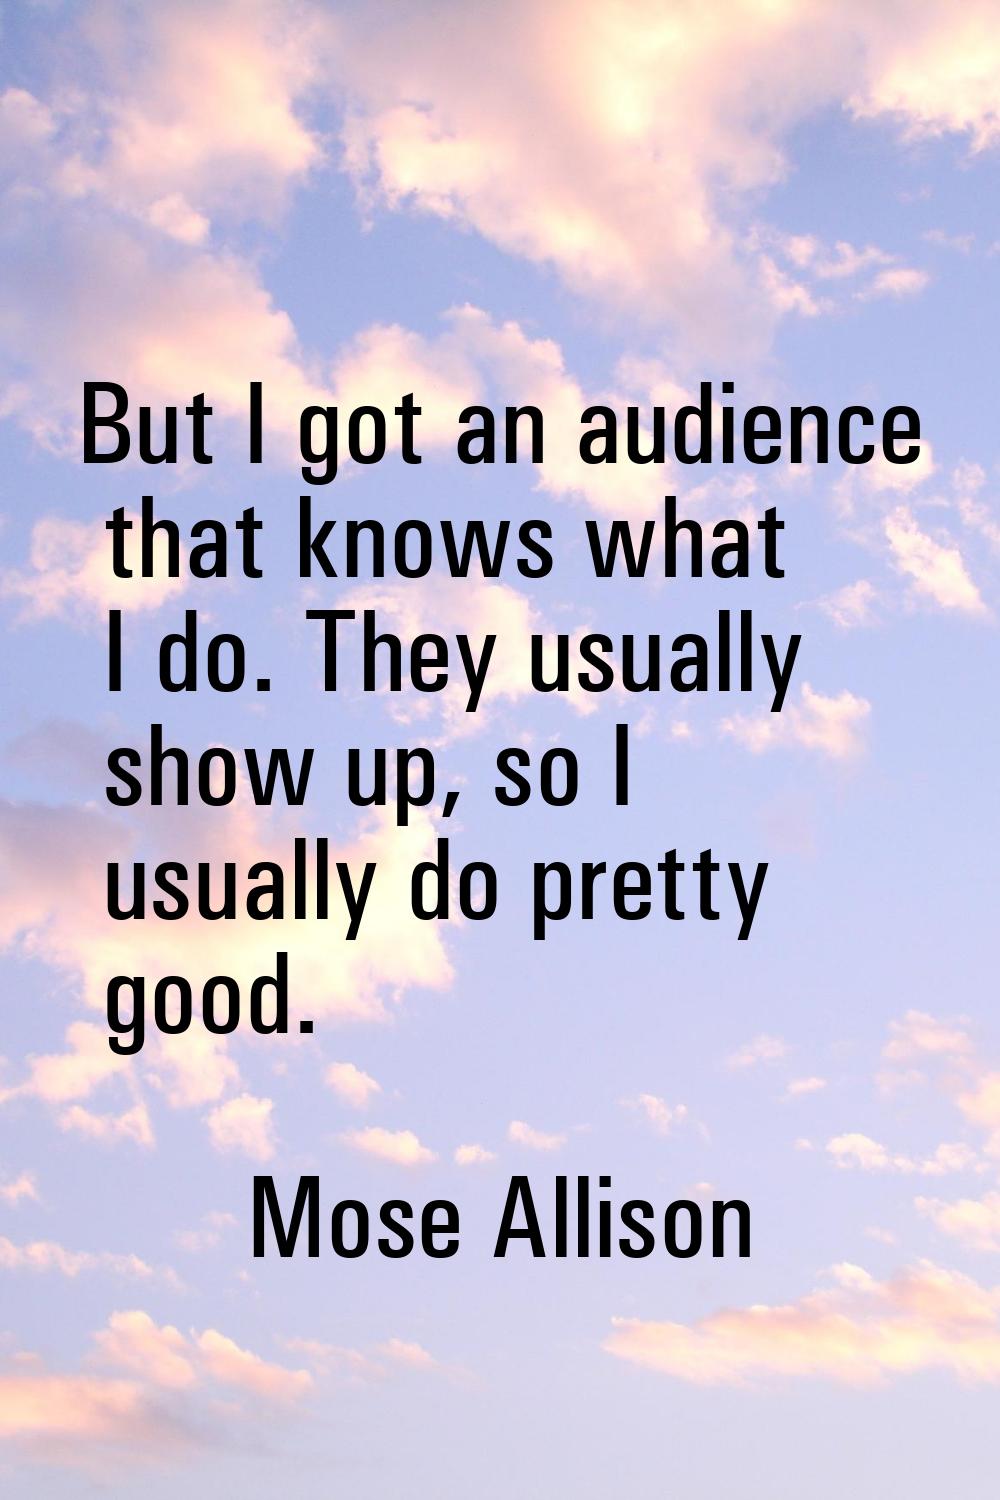 But I got an audience that knows what I do. They usually show up, so I usually do pretty good.